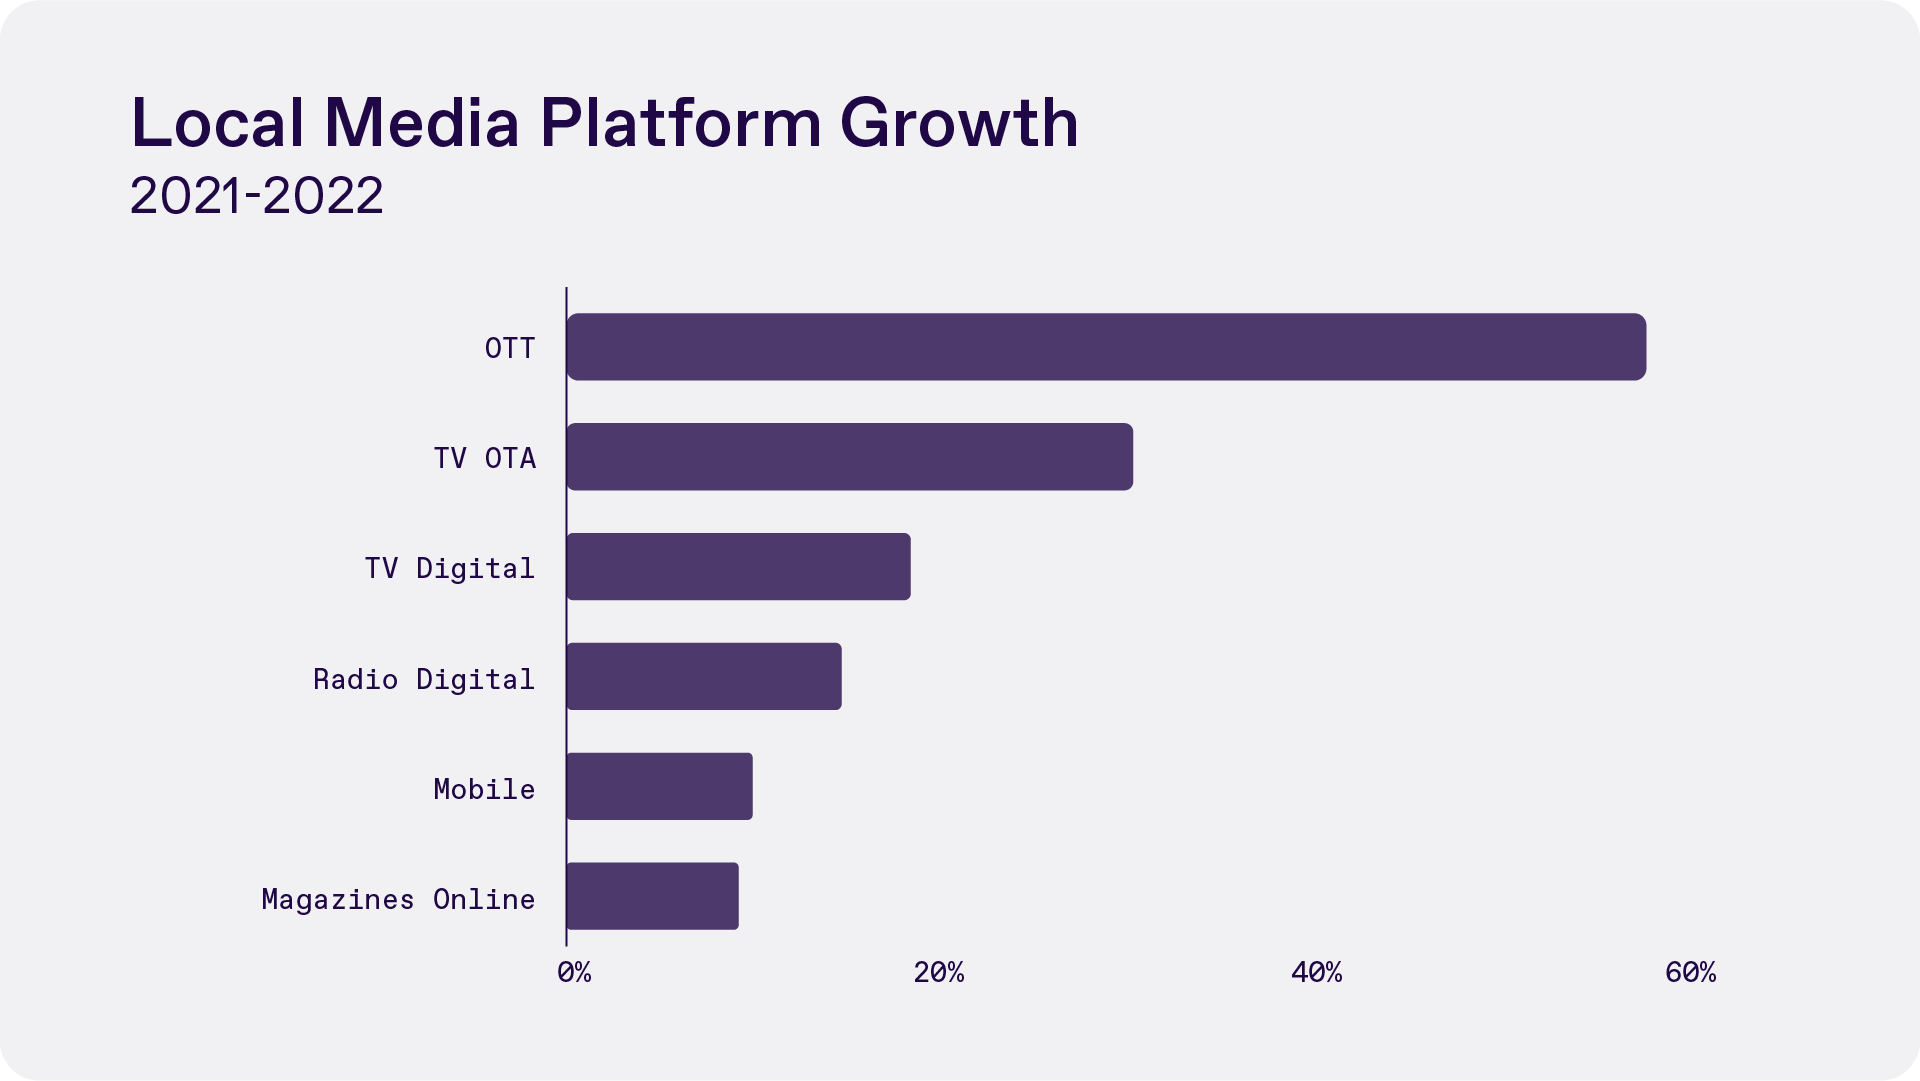 Chart showing Local Media Platform Growth from 2021-2022 